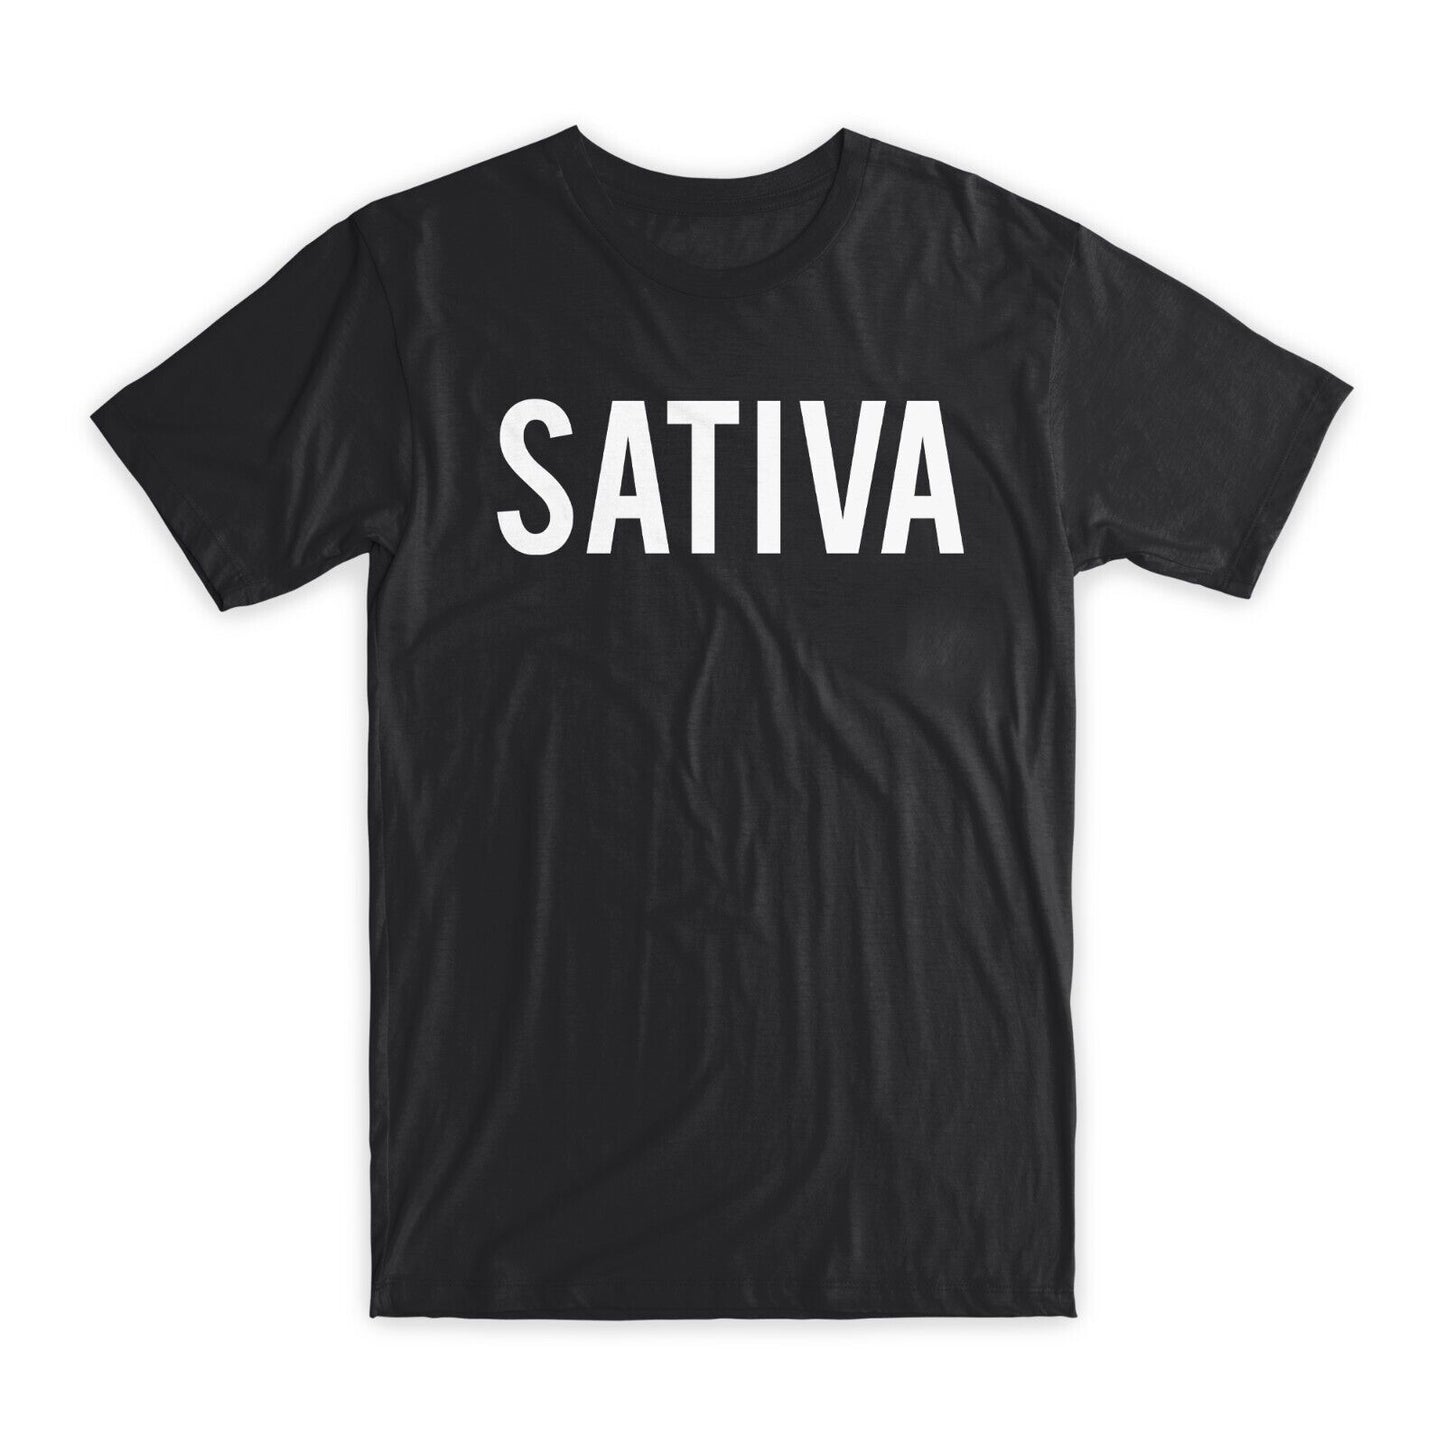 Sativa Printed T-Shirt Premium Soft Cotton Crew Neck Funny Tees Novelty Gift NEW